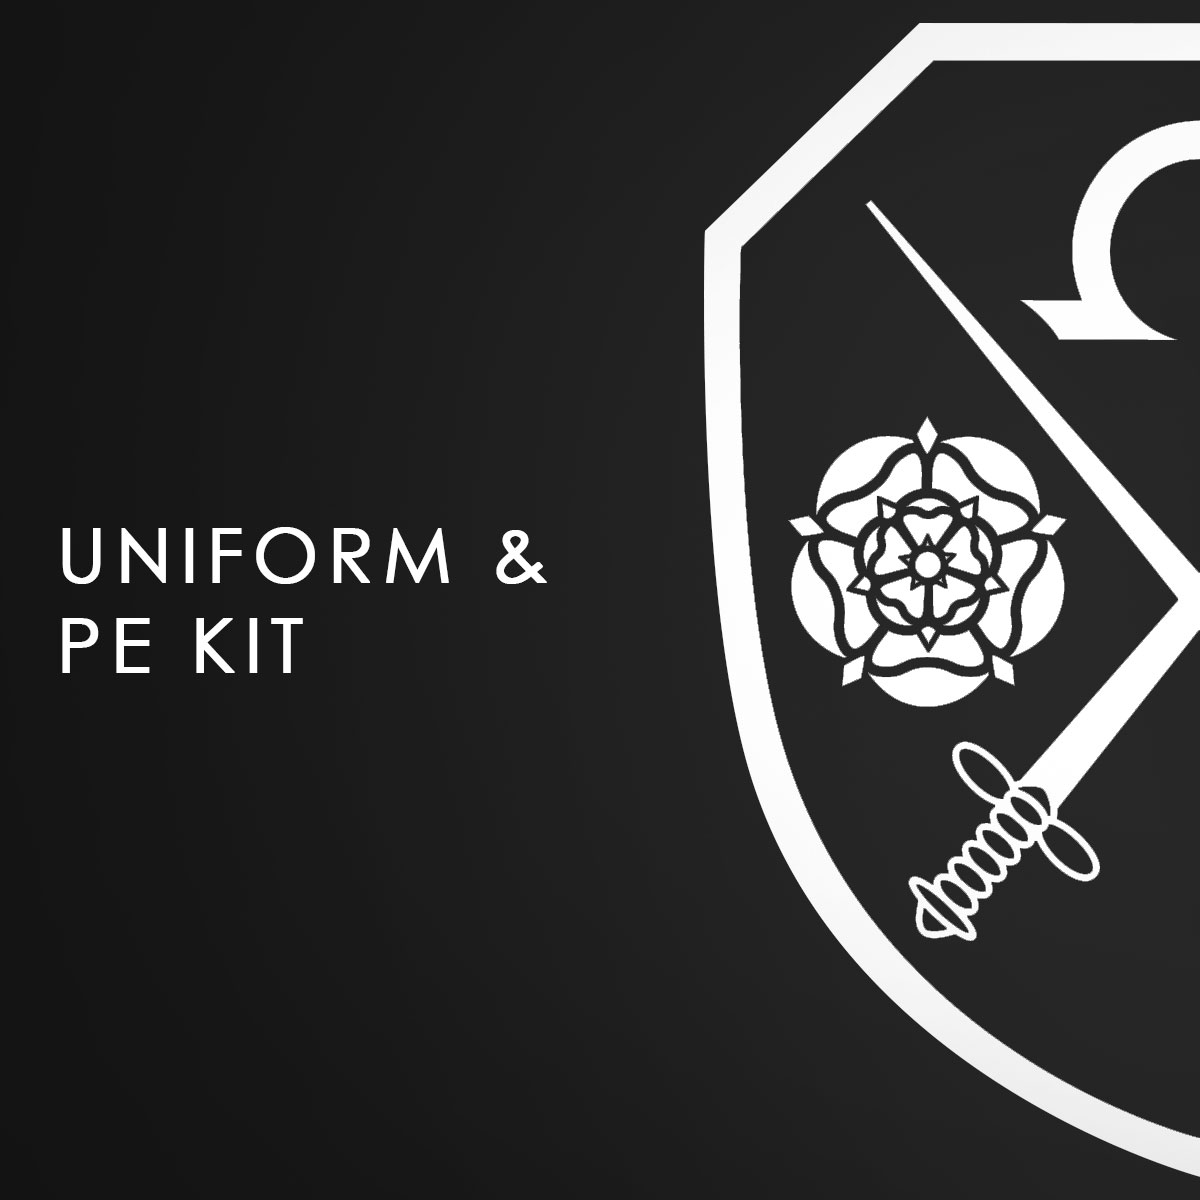 A black background with the East Barnet School logo which says Uniform and PE Kit